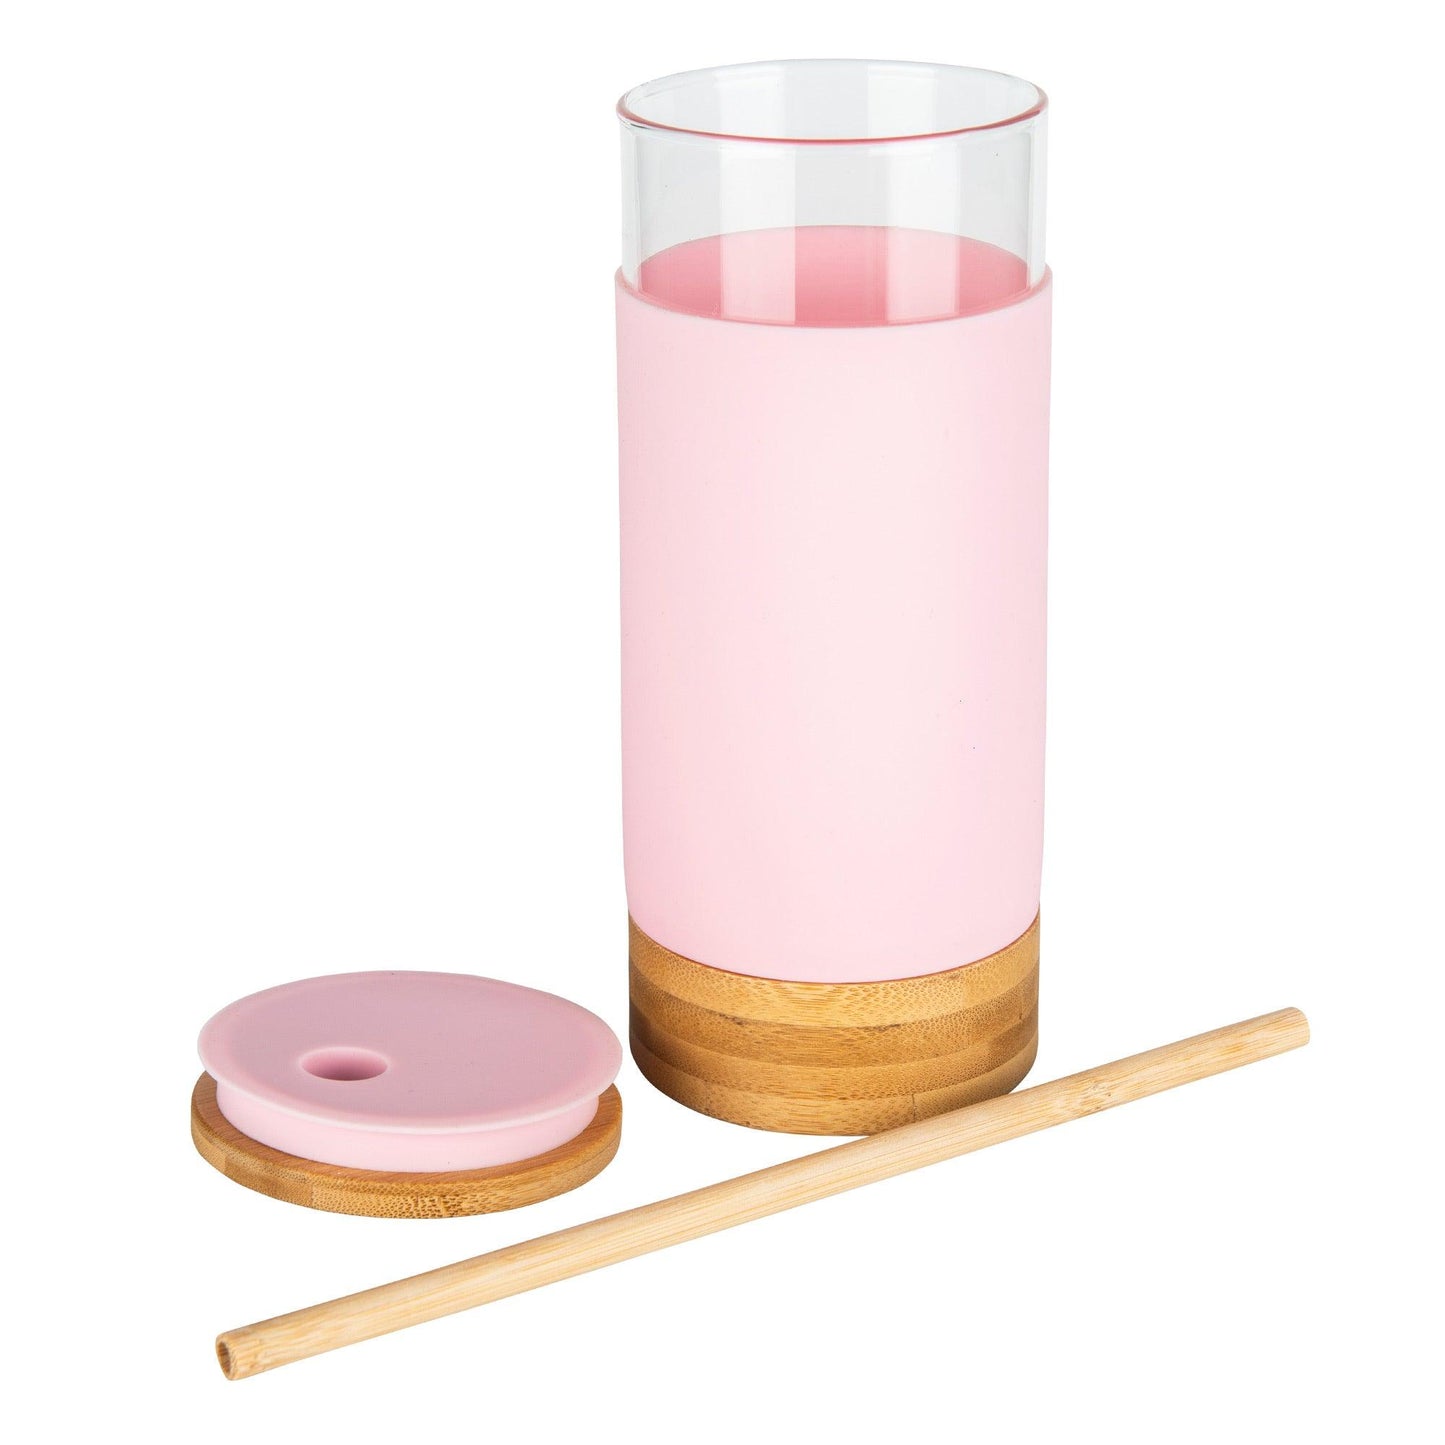 Bamboo Glass Silicone Drinking Cup with Straw - Little Label Co - Drinkware Sets - 30%, Bamboo Straw, Glass Travel Cup, Silicone Cup